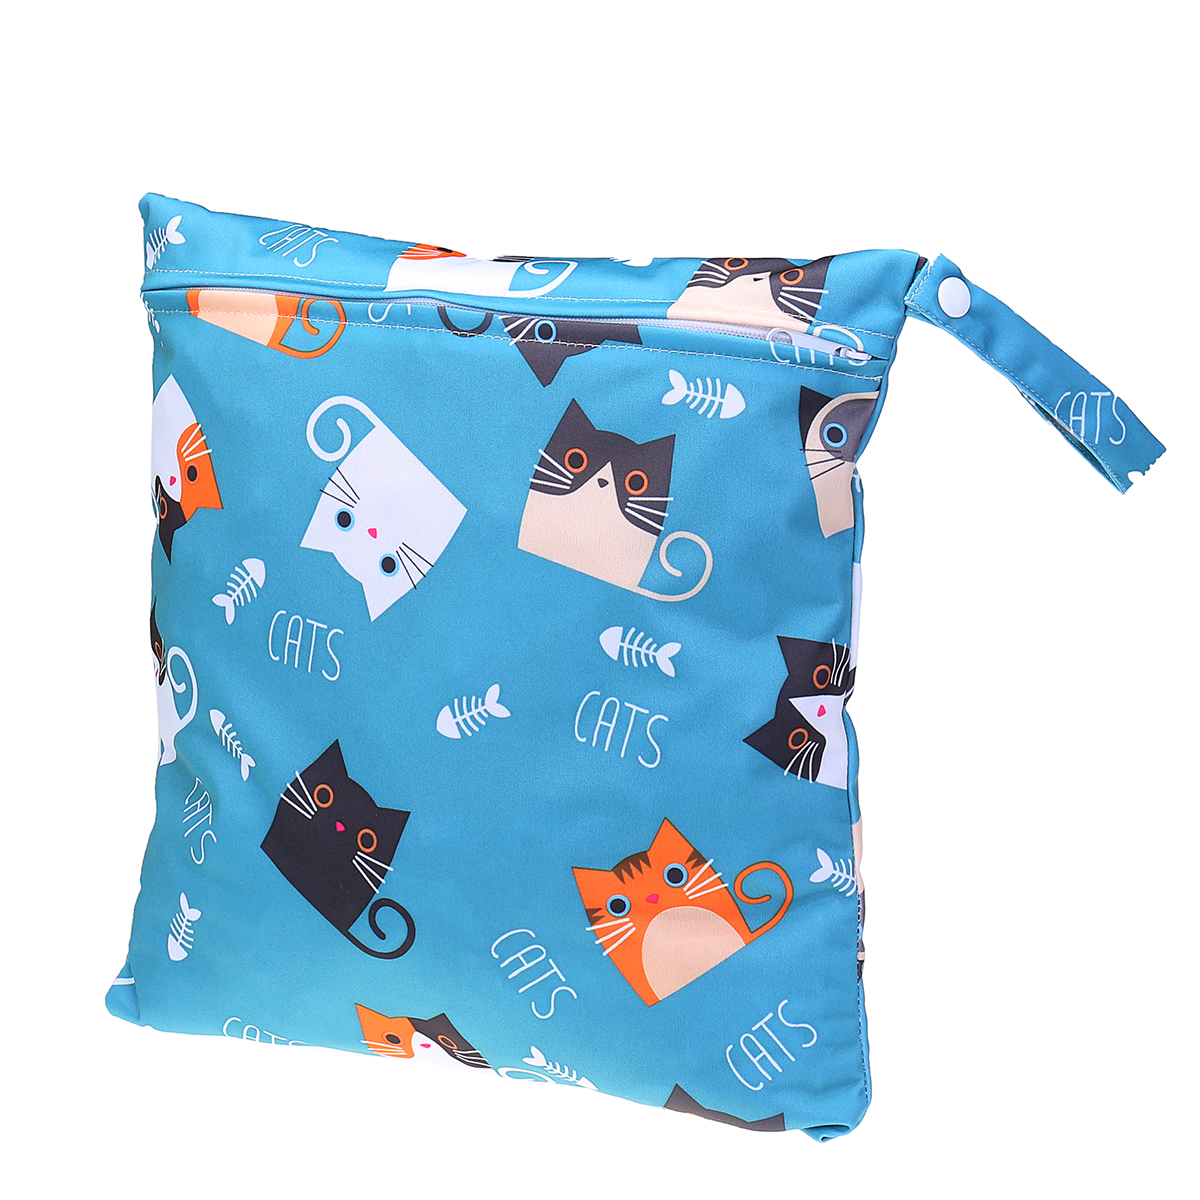 Reusable-Waterproof-Wet-Dry-Baby-Diapers-Bags-Portable-Travel-Baby-Nappy-Changing-Double-Pocket-Wetb-1647666-9